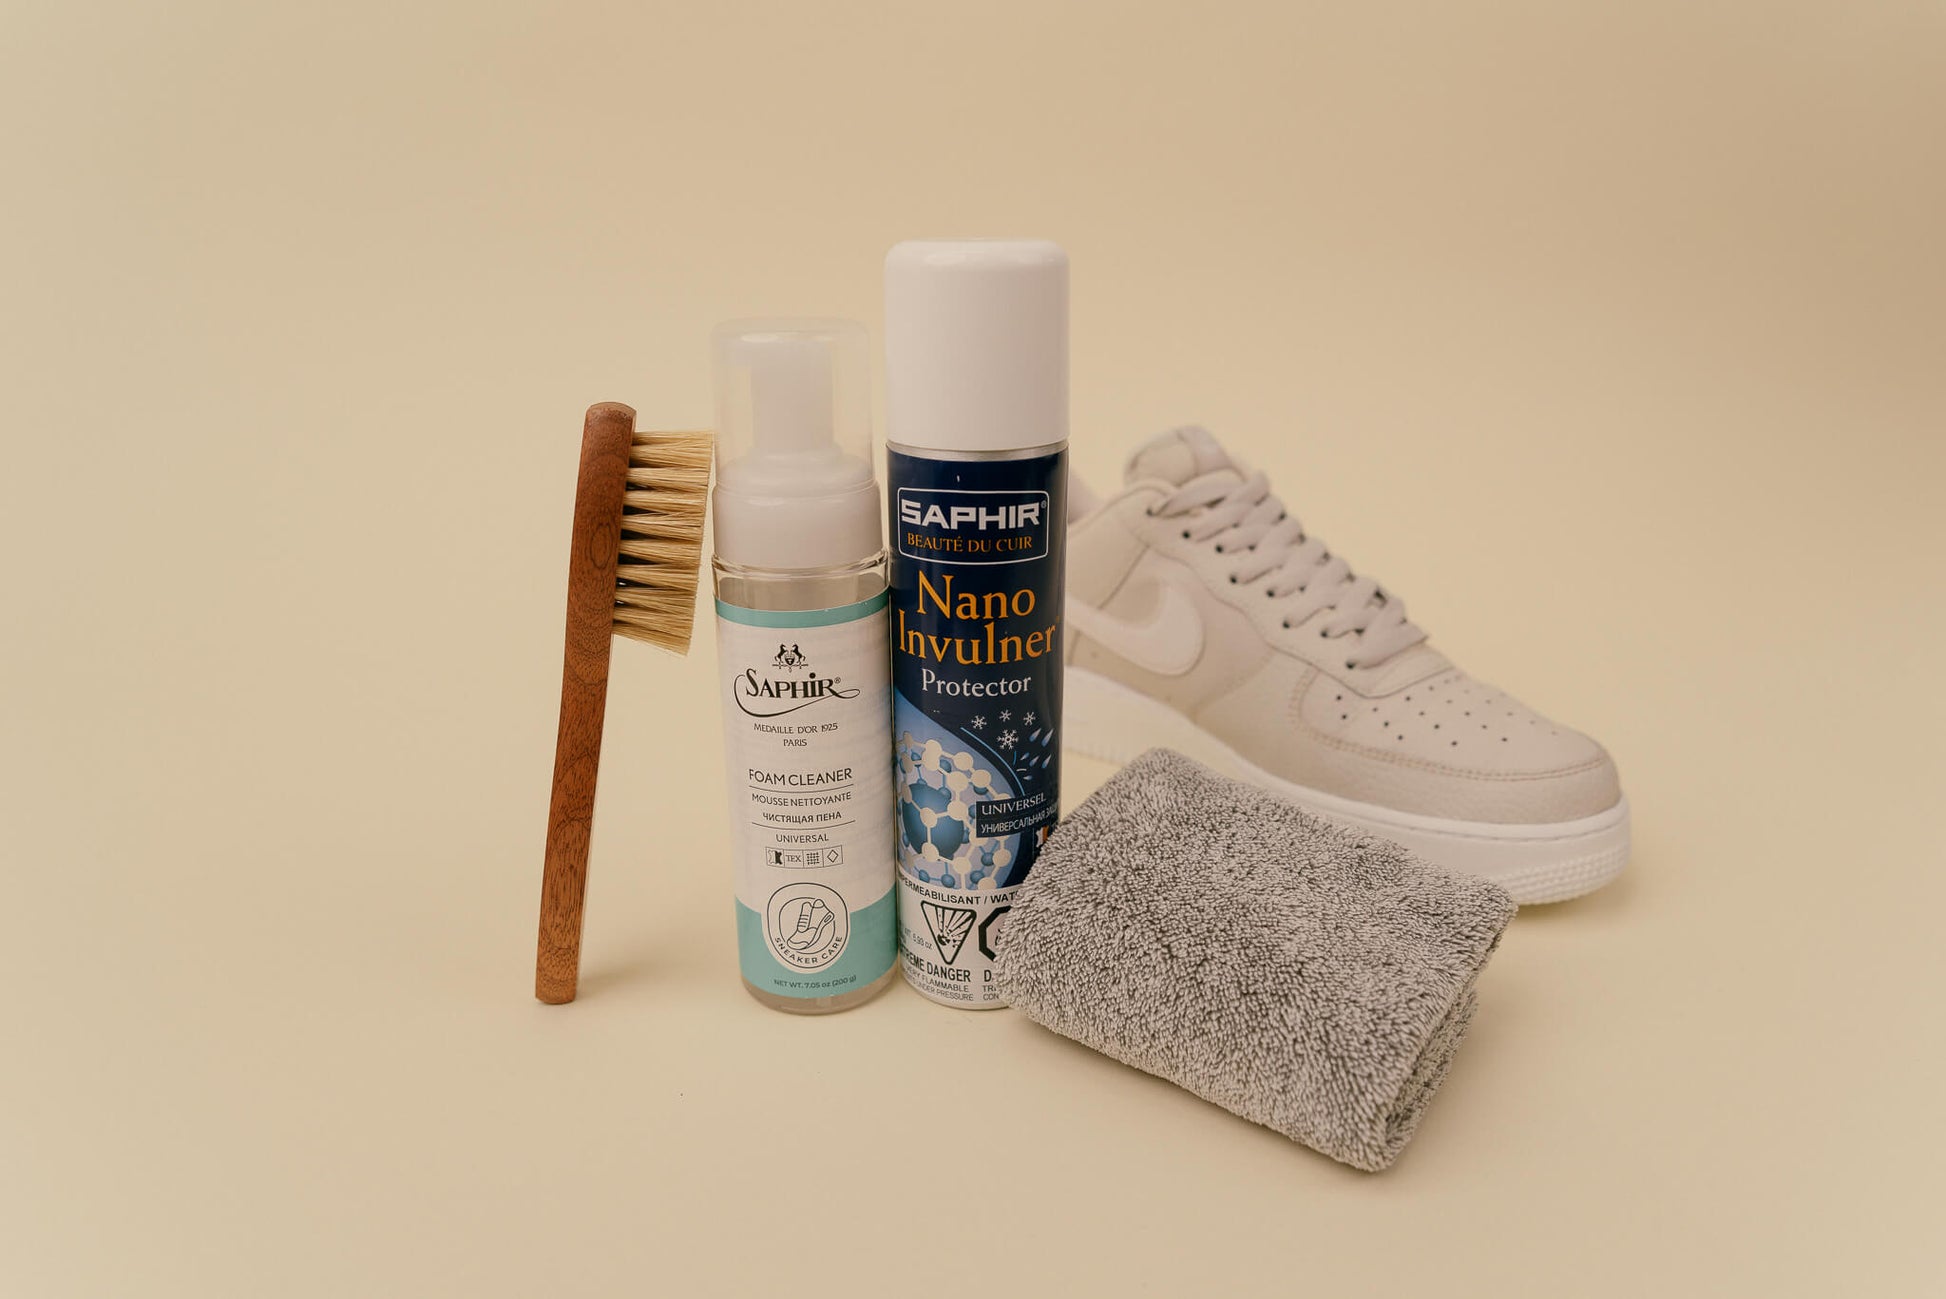 Basic Sneaker Care Kit - Brillaré Sneaker, Shoe, and Boot Care Experts. Canada's Official Saphir Reseller. Based in Calgary, Alberta.